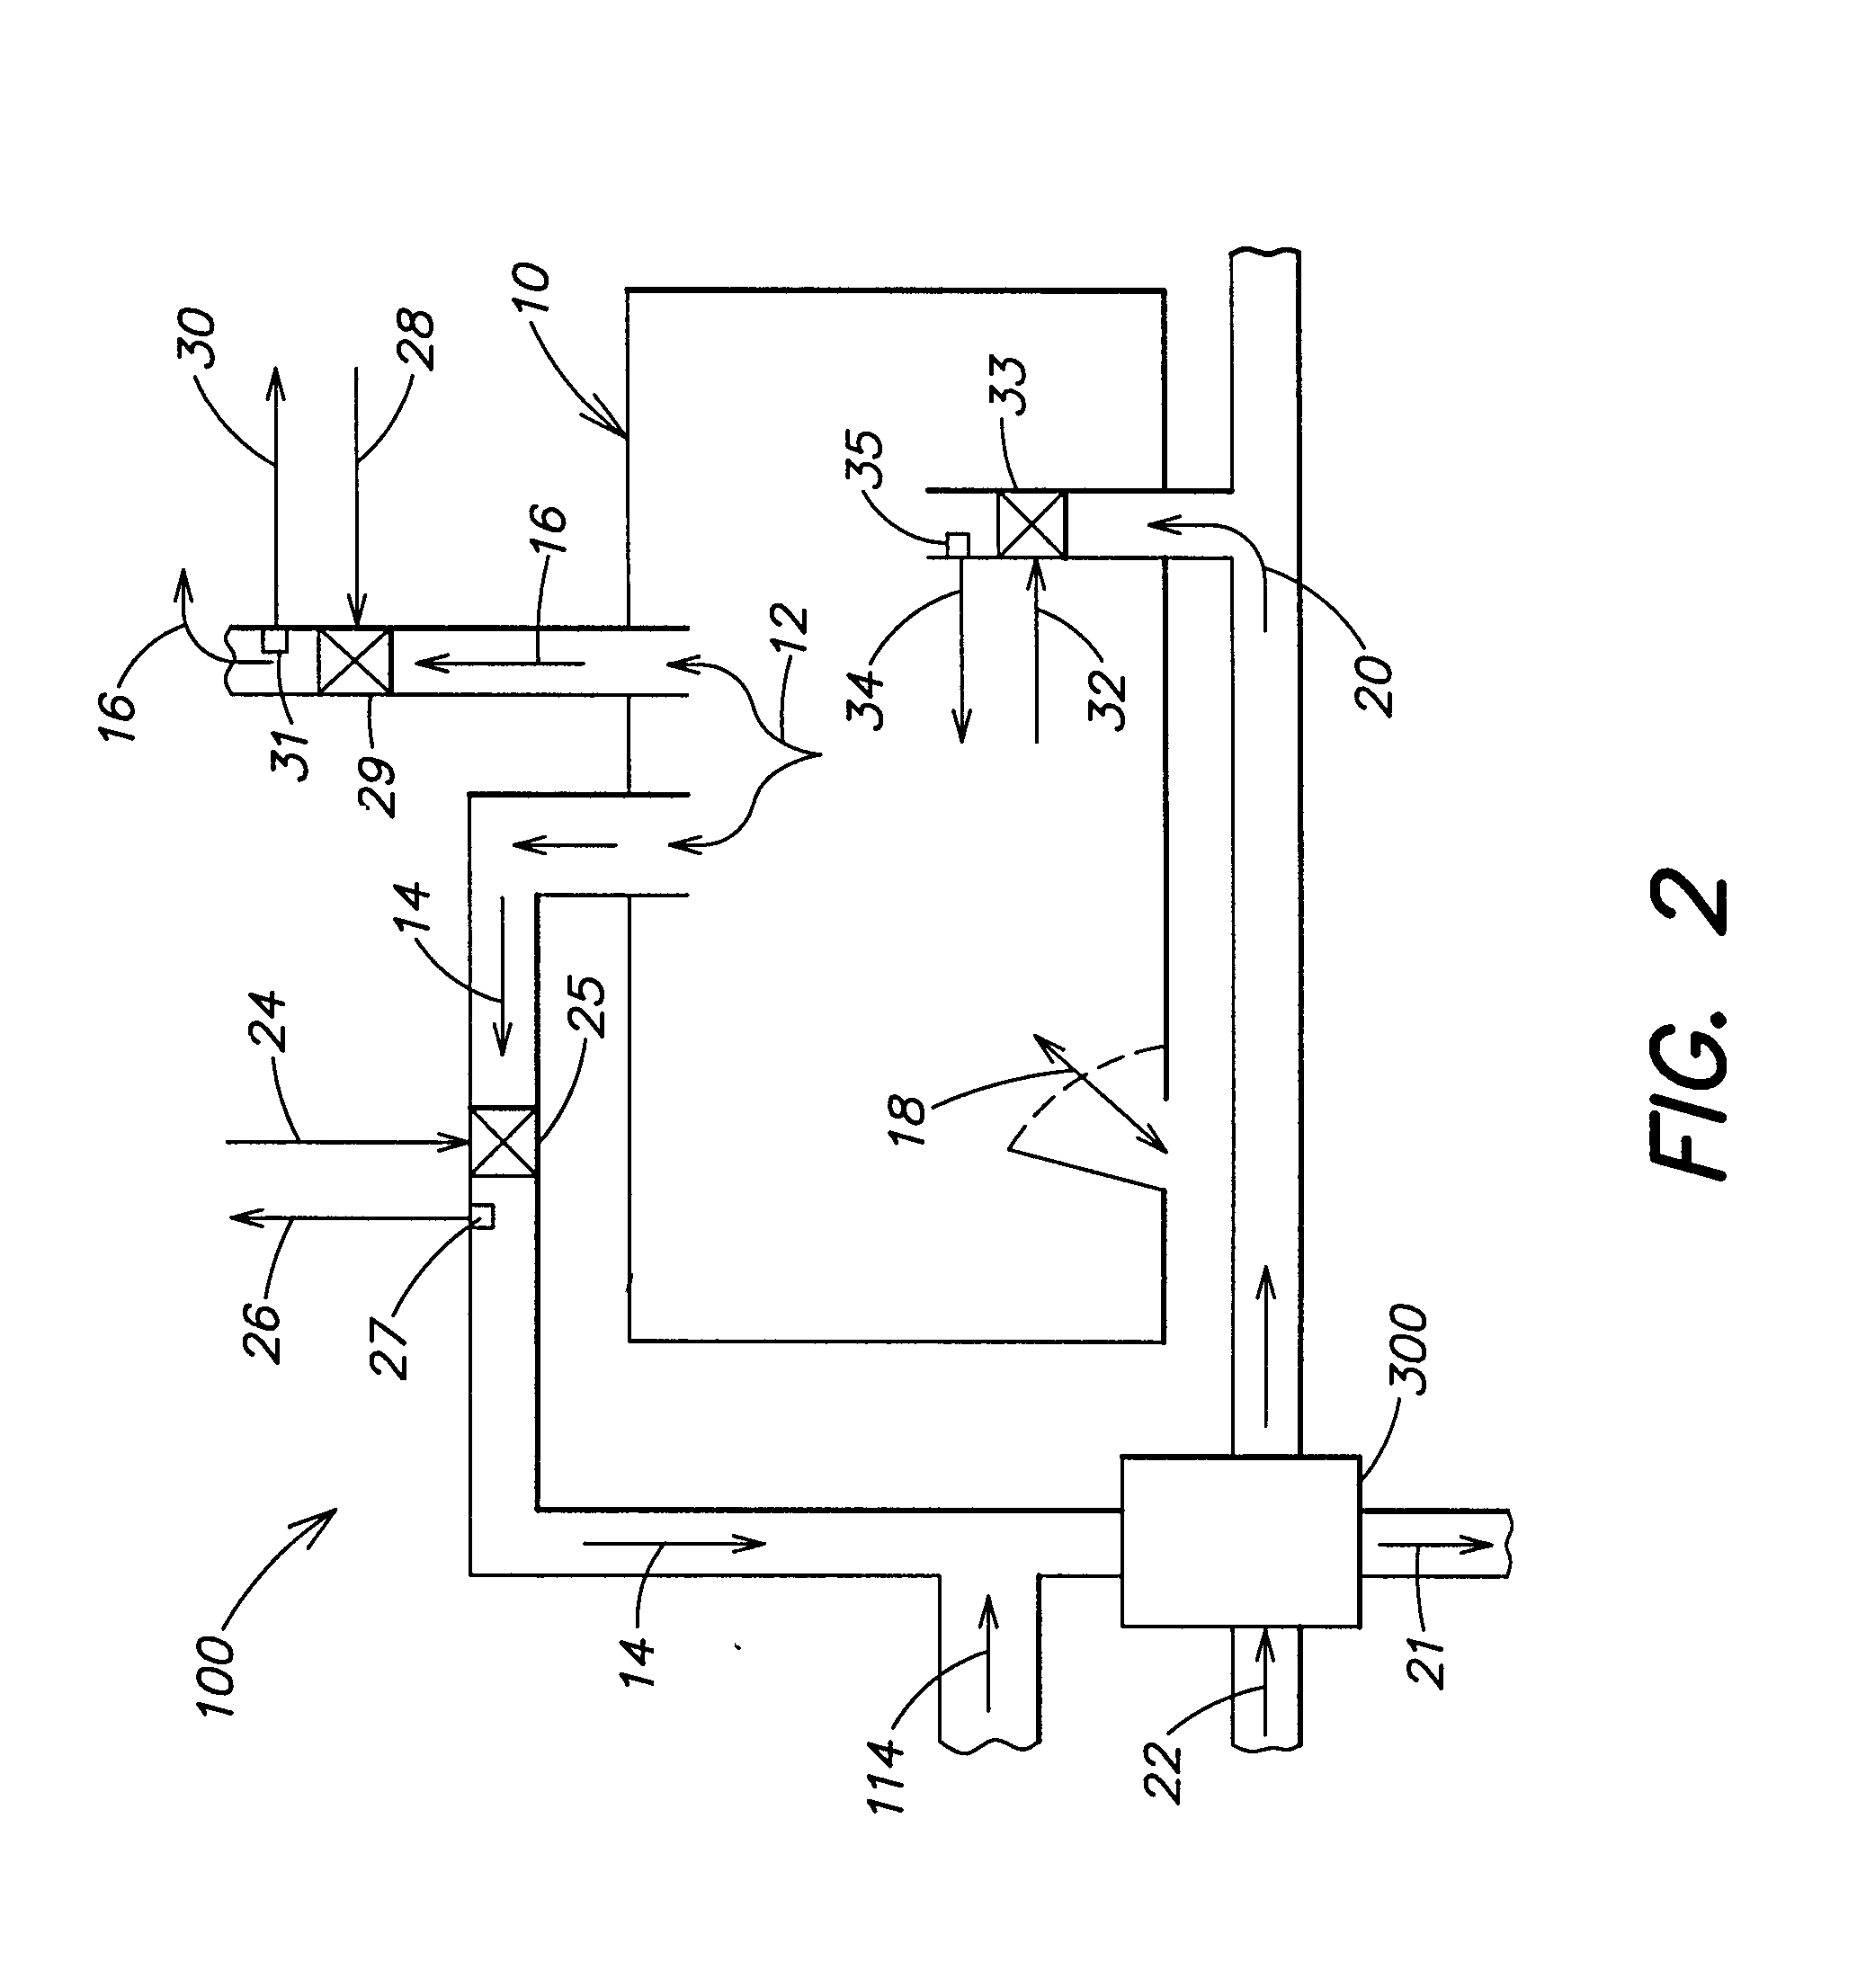 Methods and apparatus for recirculating air in a controlled ventilated environment